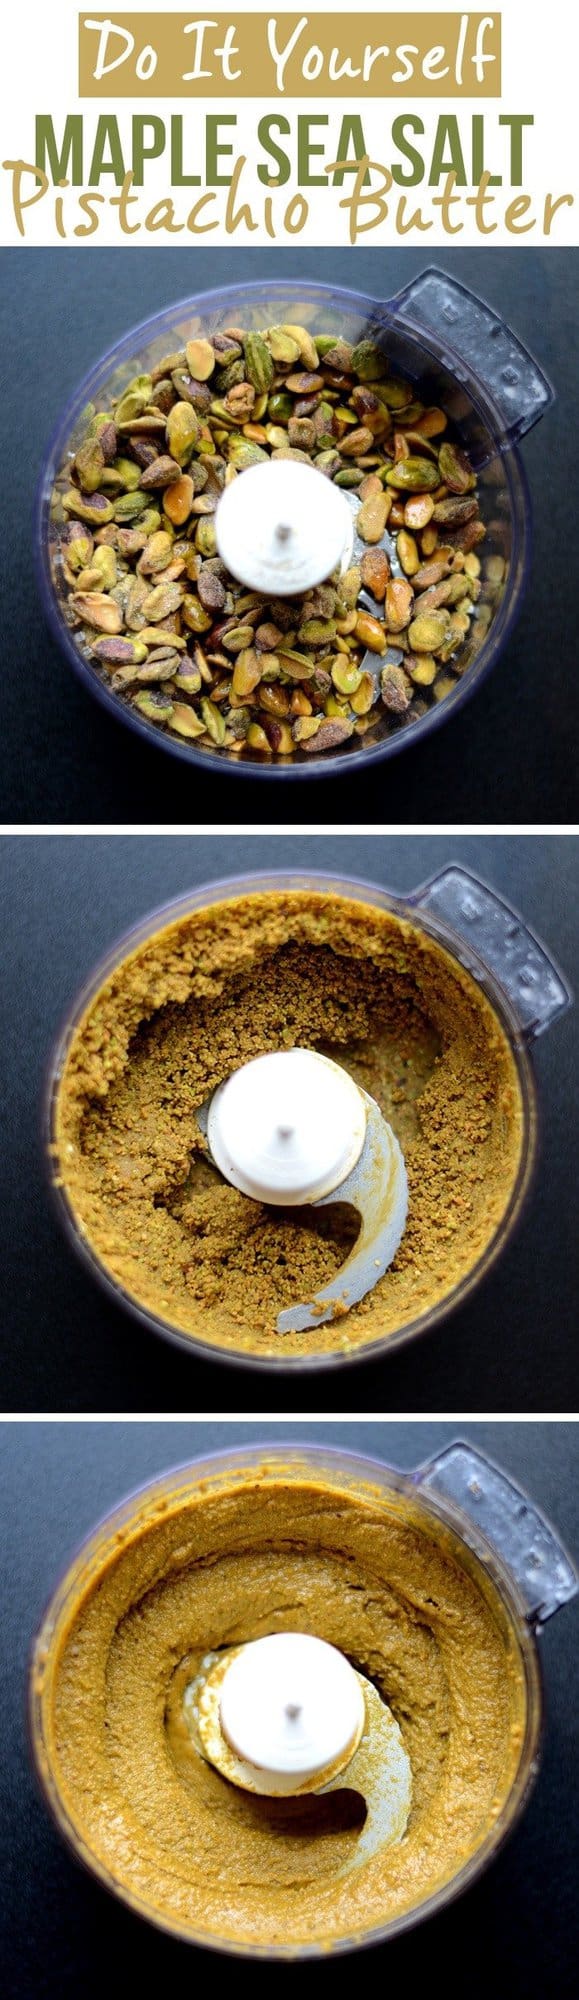 Make your own homemade Maple Sea Salt Pistachio Butter with just a few simple ingredients and a food processor. It's vegan and paleo-friendly!